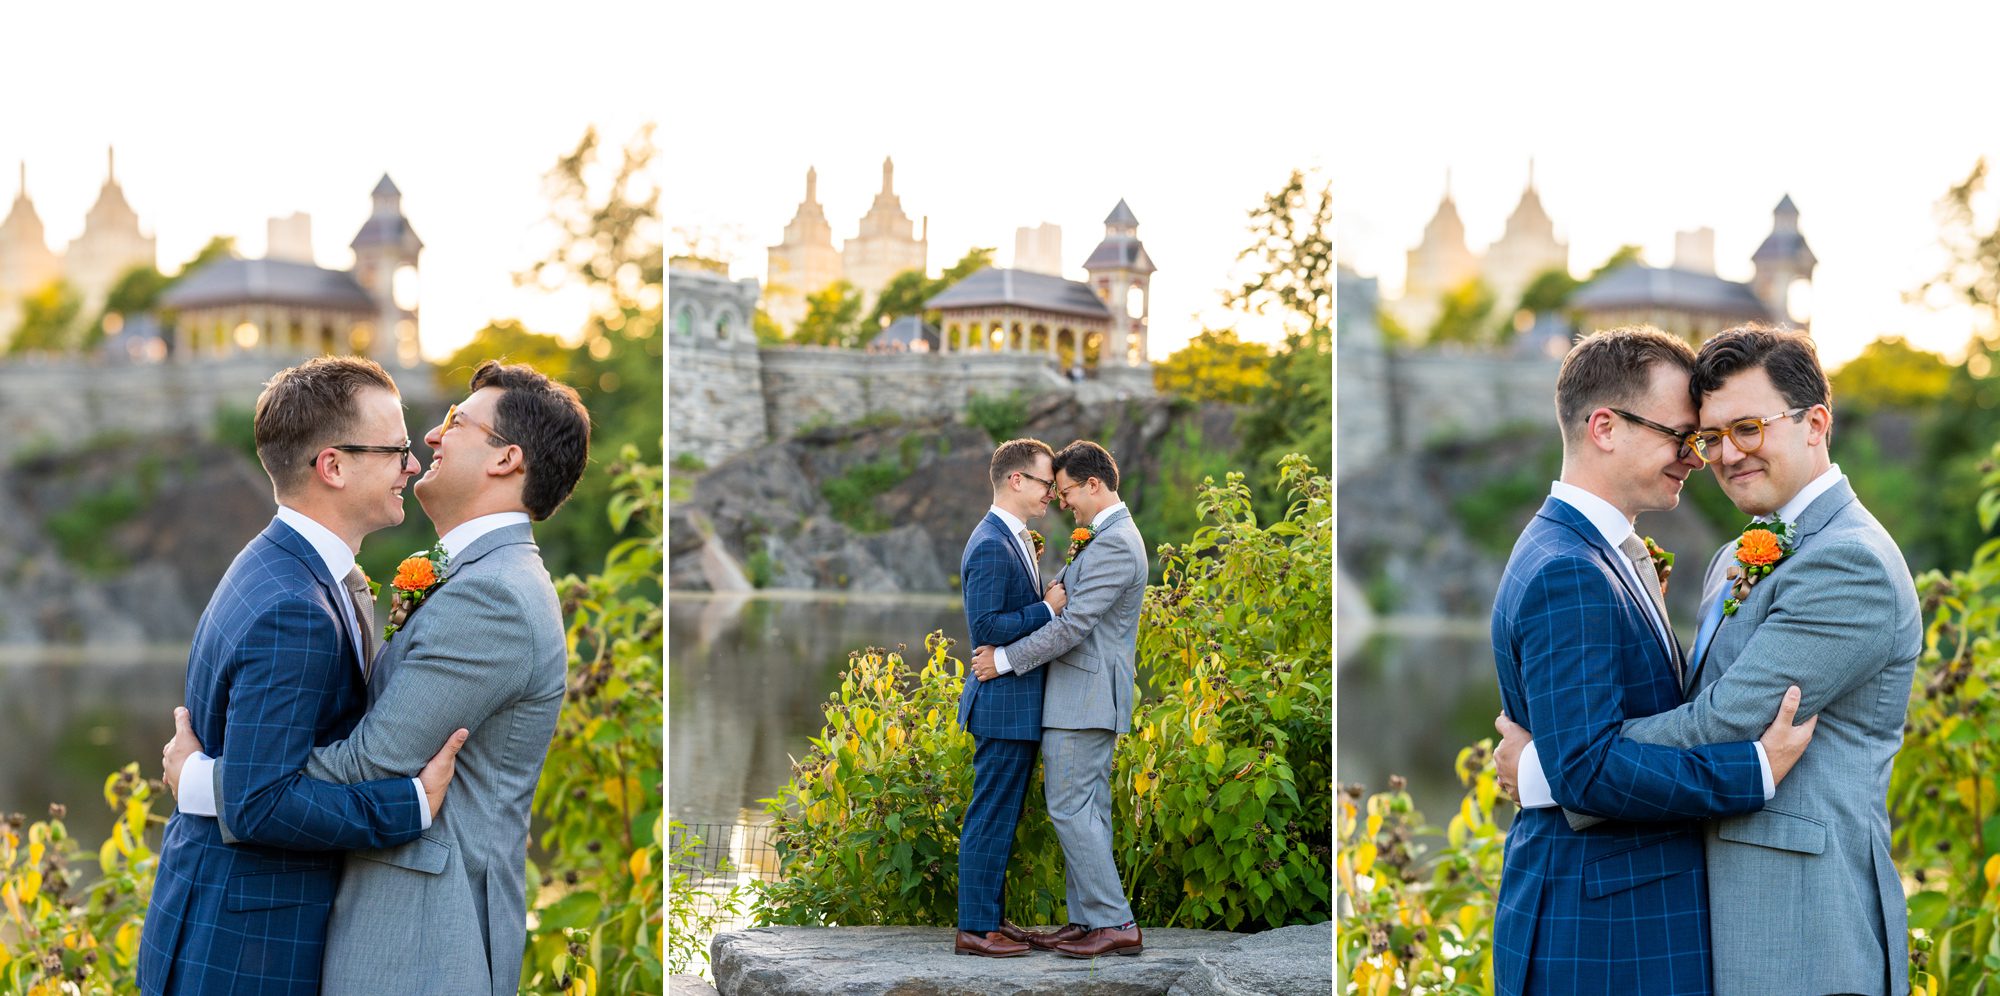 NYC Elopement in Central Park 